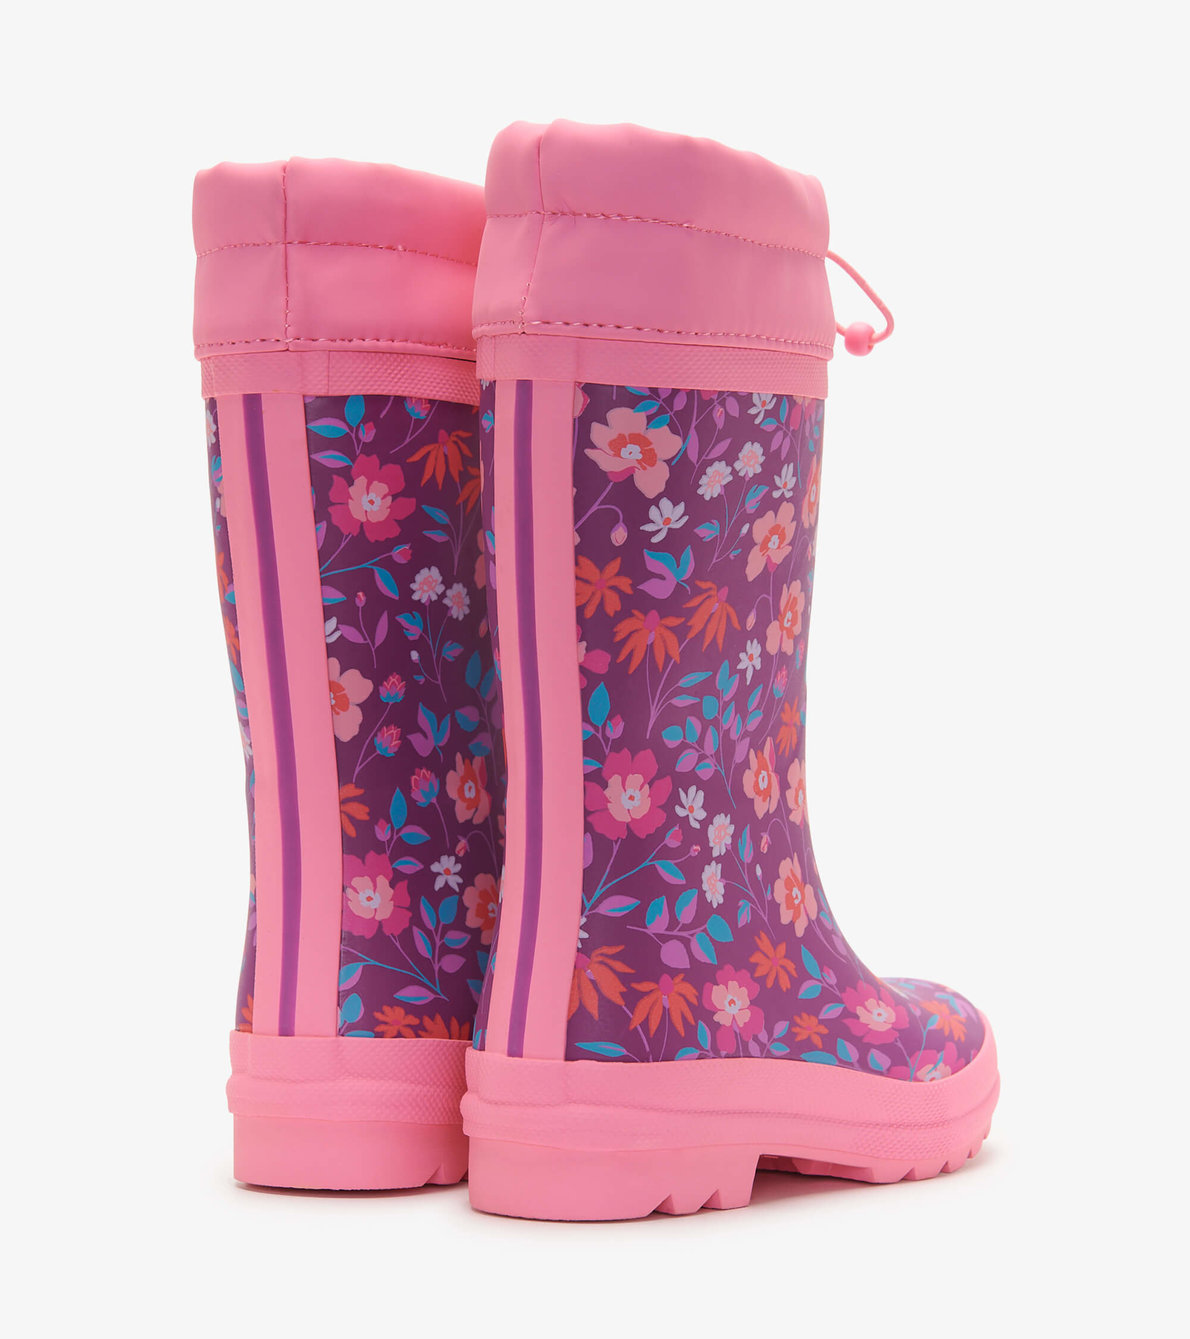 View larger image of Wild Flowers Sherpa Lined Kids Rain Boots